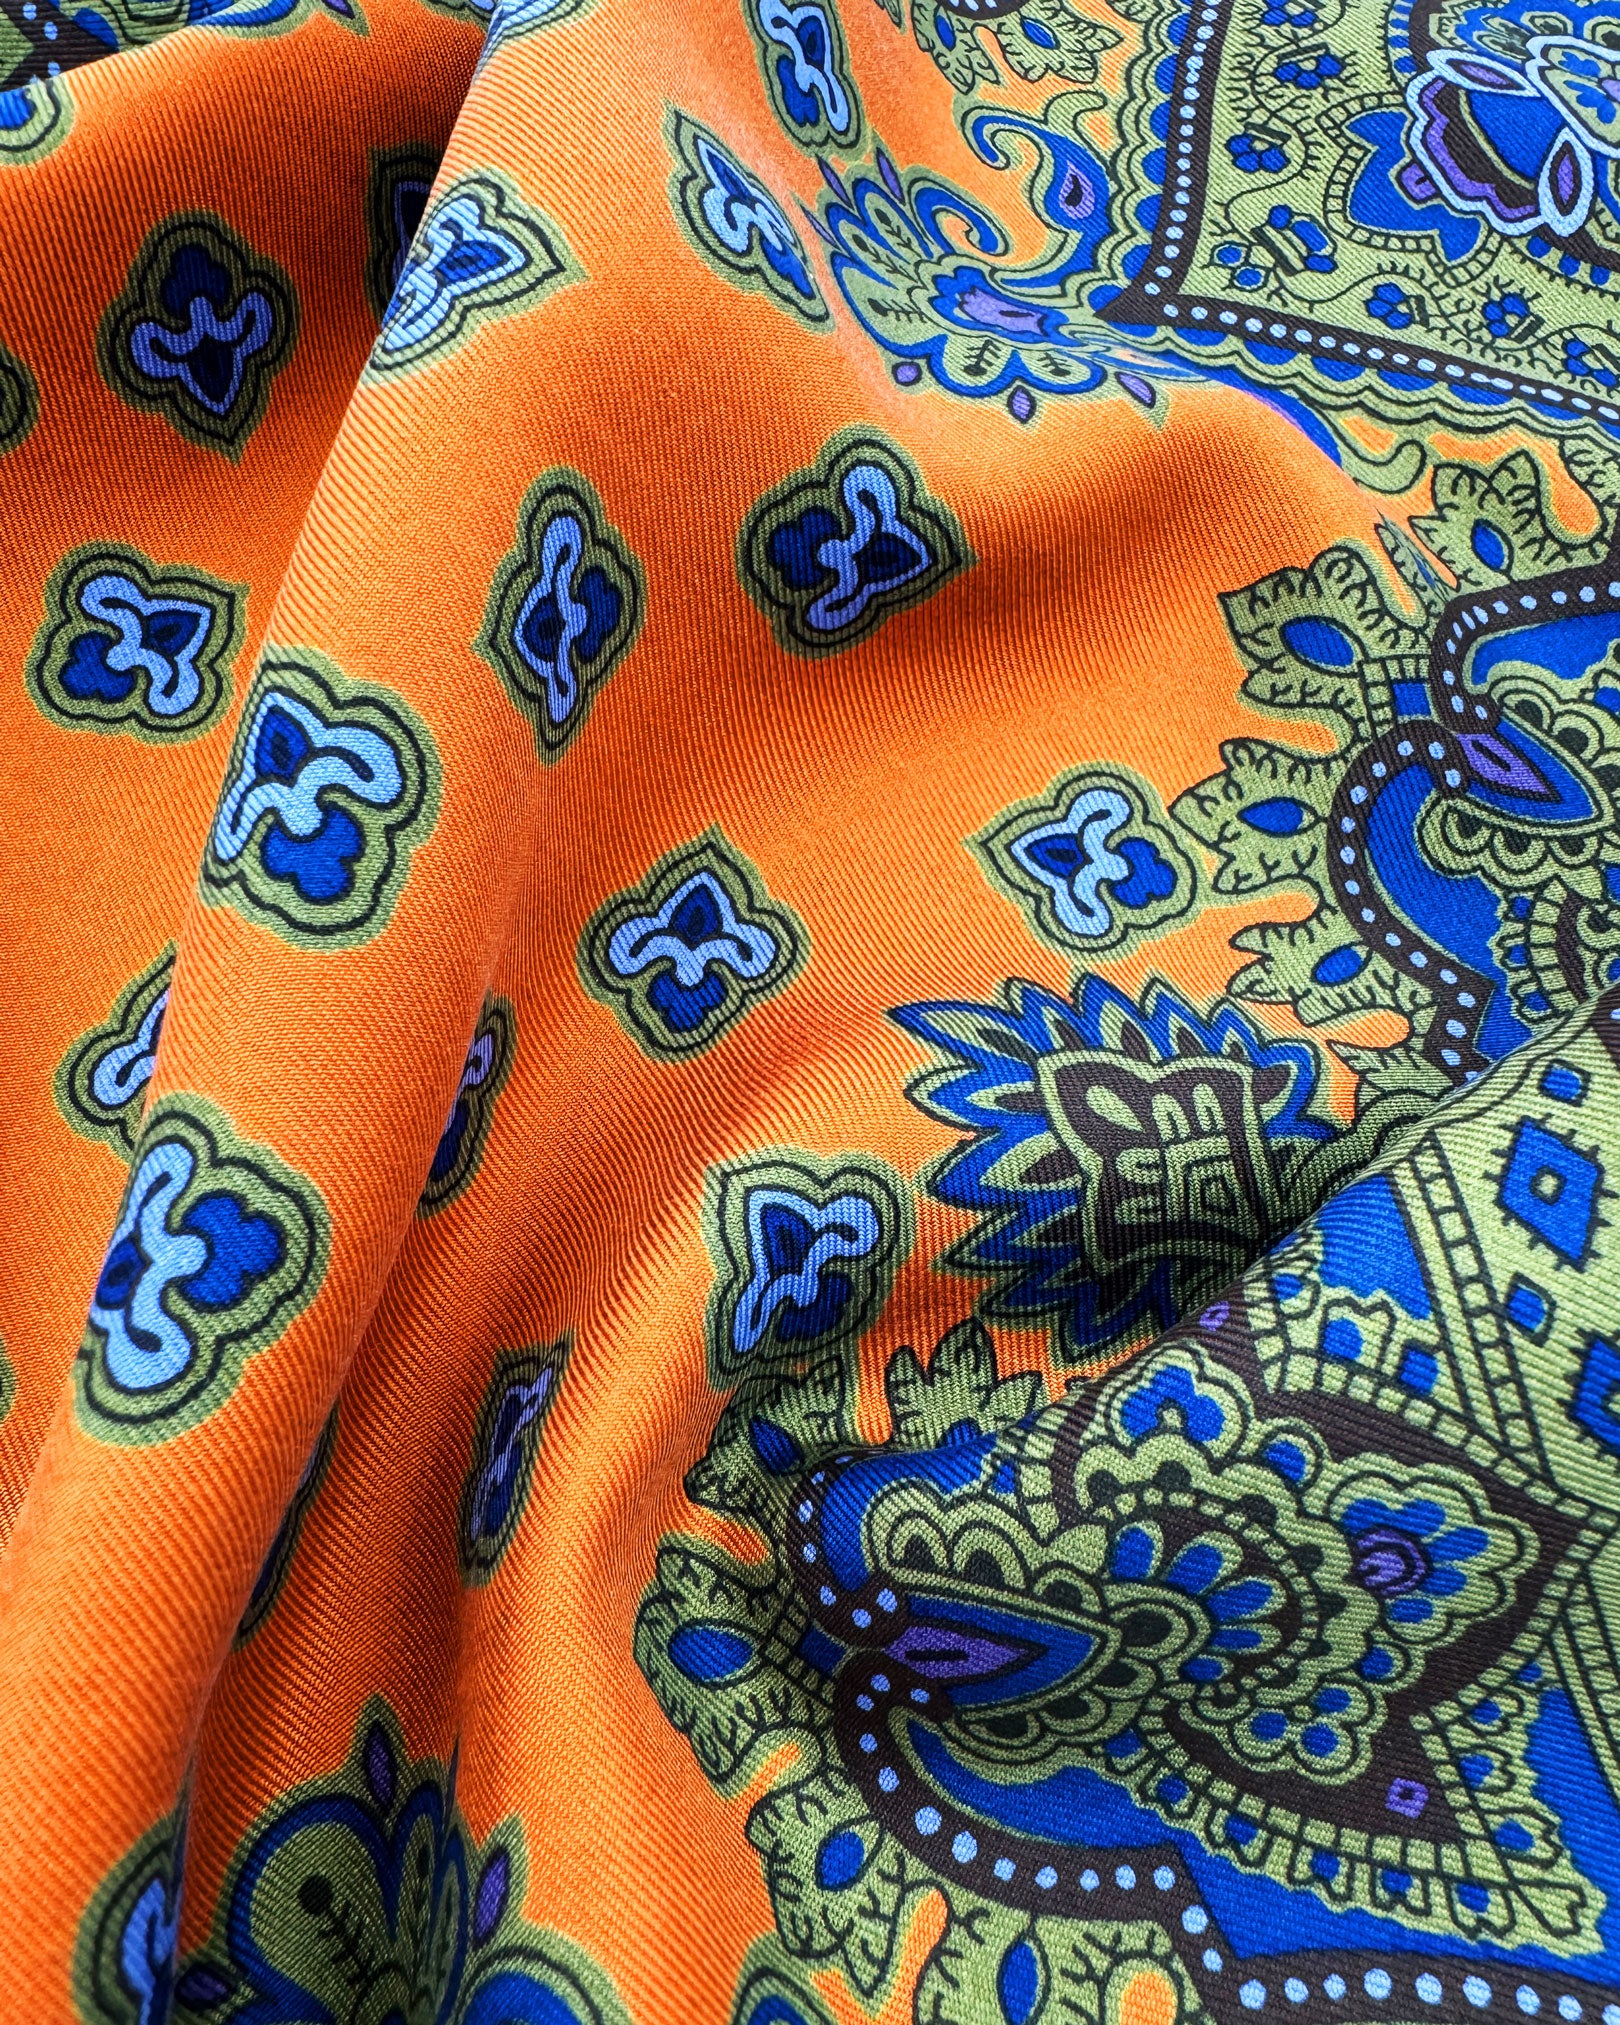 A ruffled close-up of the 'Ambleside' pocket square, presenting a closer view of the miniature fleur-de-lis patterns against the attractive lustre of the madder silk material. 